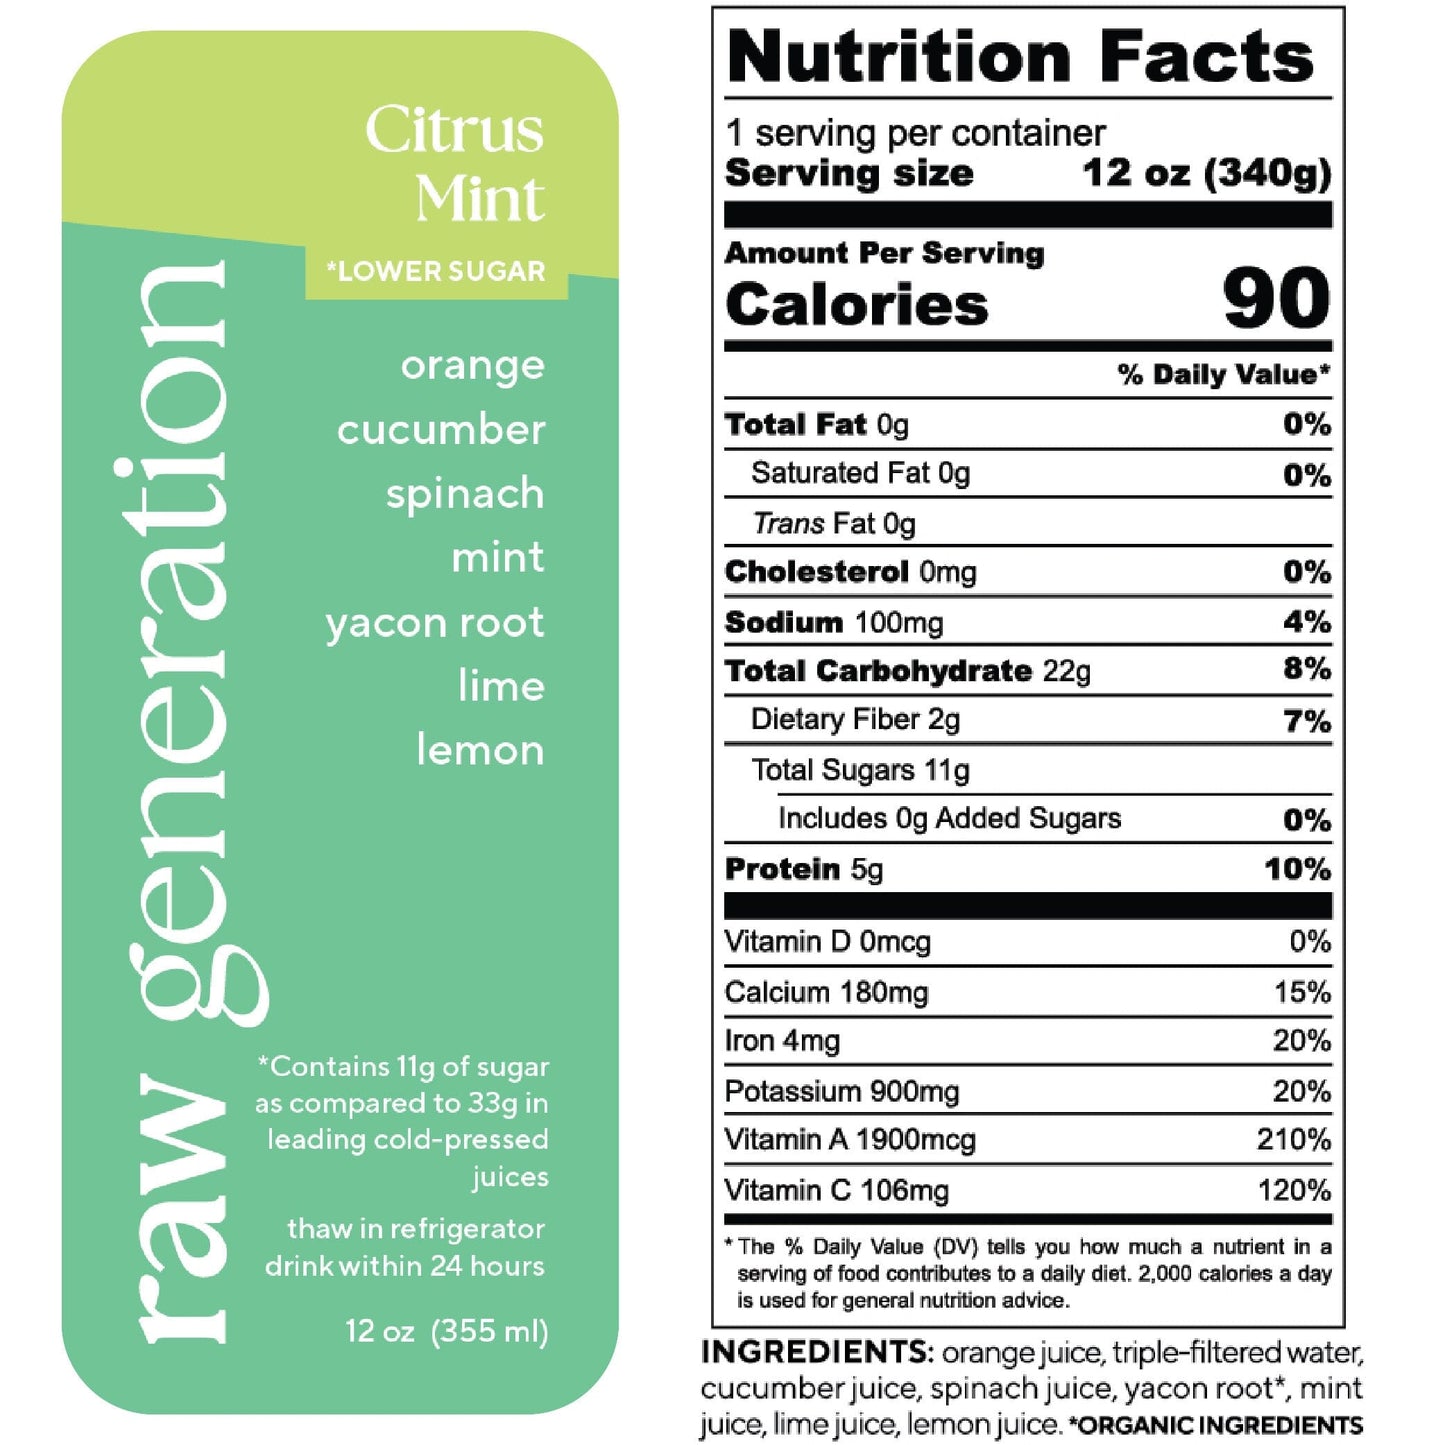 Nutrition Facts, 1 serving/container, 12 oz (340g), Calories 90, Total Fat 0g, Saturated Fat 0g, Trans Fat 0g, Cholesterol 0mg, Sodium 100mg, Total Carbohydrate 22g, Dietary Fiber 2g, Total Sugars 11g, Added Sugars 0g, Protein 5g, Vitamin D 0mcg, Calcium 180mg, Iron 4mg, Potassium 900mg, Vitamin A 1900mcg, Vitamin C 106mg; Ingredients: cucumber juice, spinach juice, yacon root (organic), mint juice, lime juice, lemon juice.